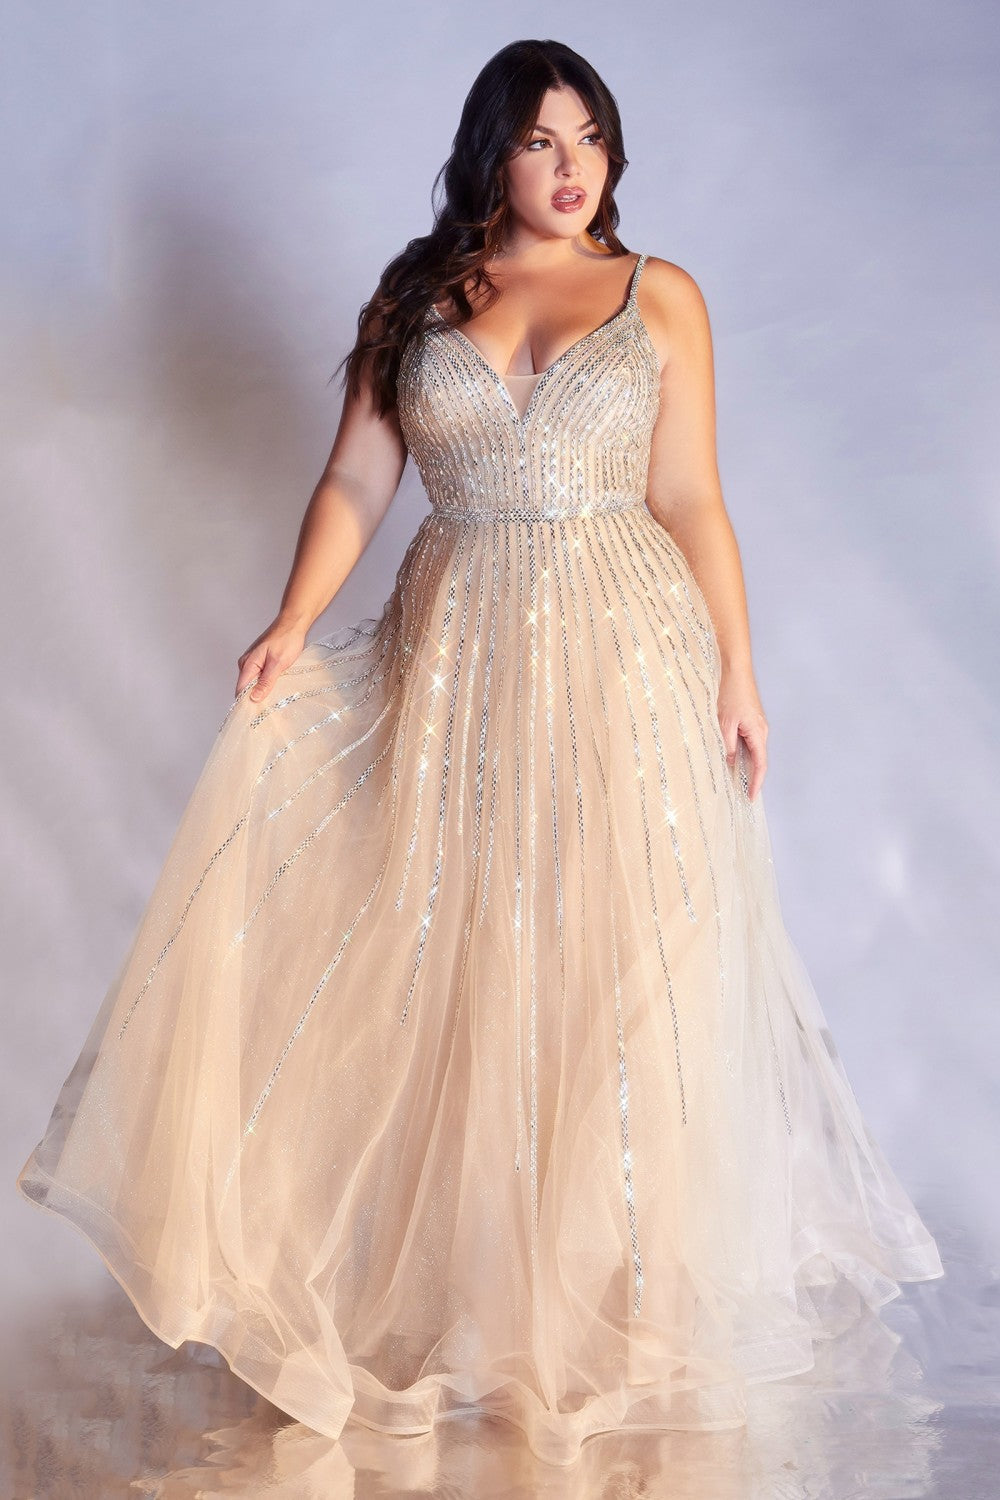 A-Line Luxury Embellished Prom Gown Deep V-Neckline Backless Bodice with Spaghetti Straps Radiant Glitter Layered Skirt CDCD940C Elsy Style Prom Dress